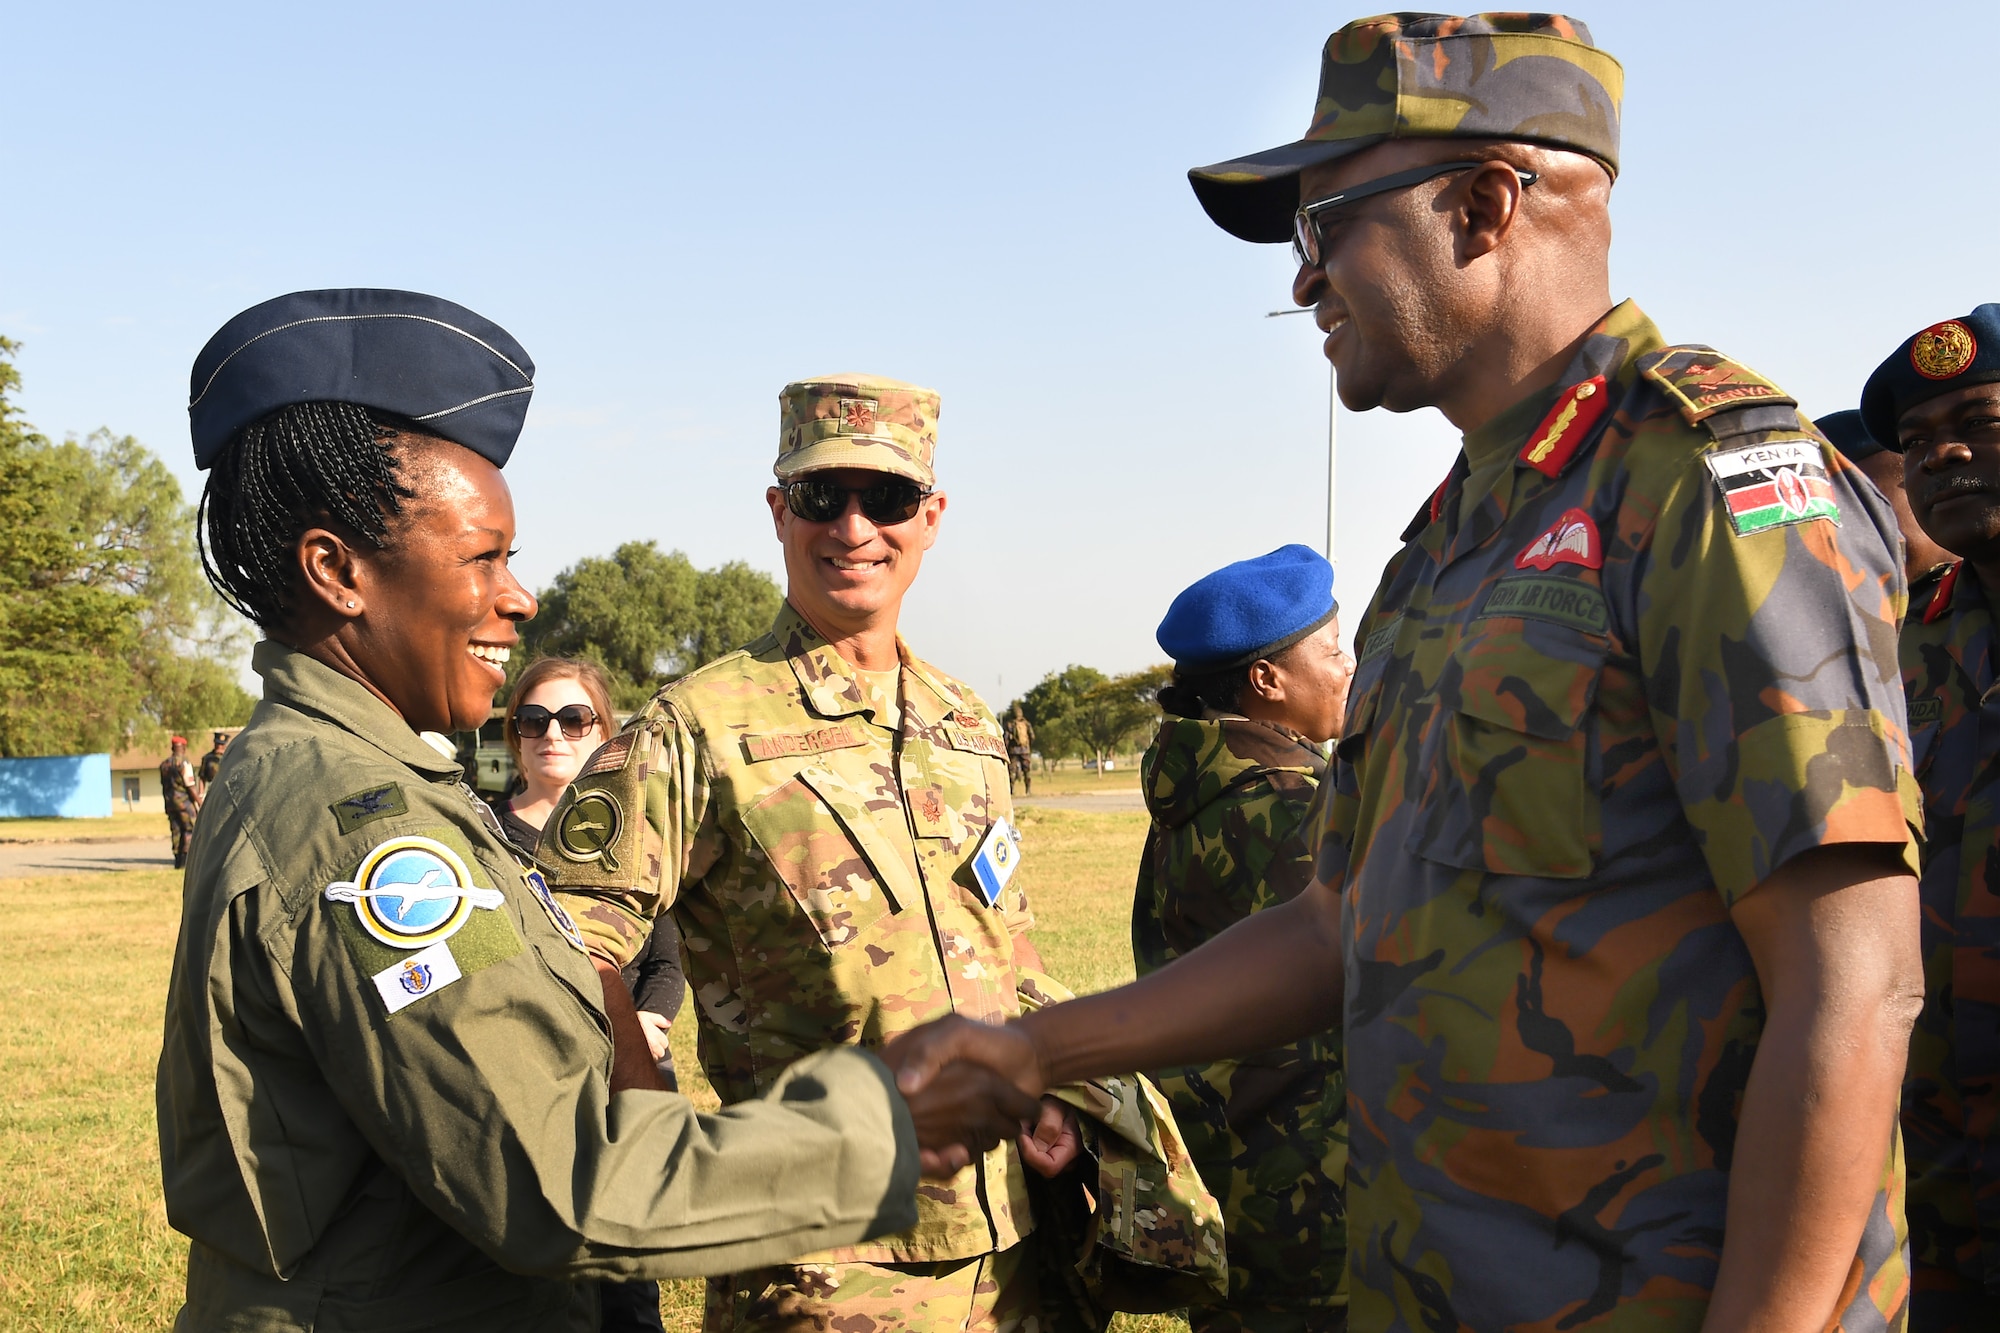 Col. Melinda Swanson, 102nd Medical Group commander, shakes hands with Maj. Gen. Francis C. Ogolla, commander of the Kenya air force, following the opening ceremony for African Partnership Flight Kenya 2019 at Laikipia Air Base, Kenya, August 20, 2019.